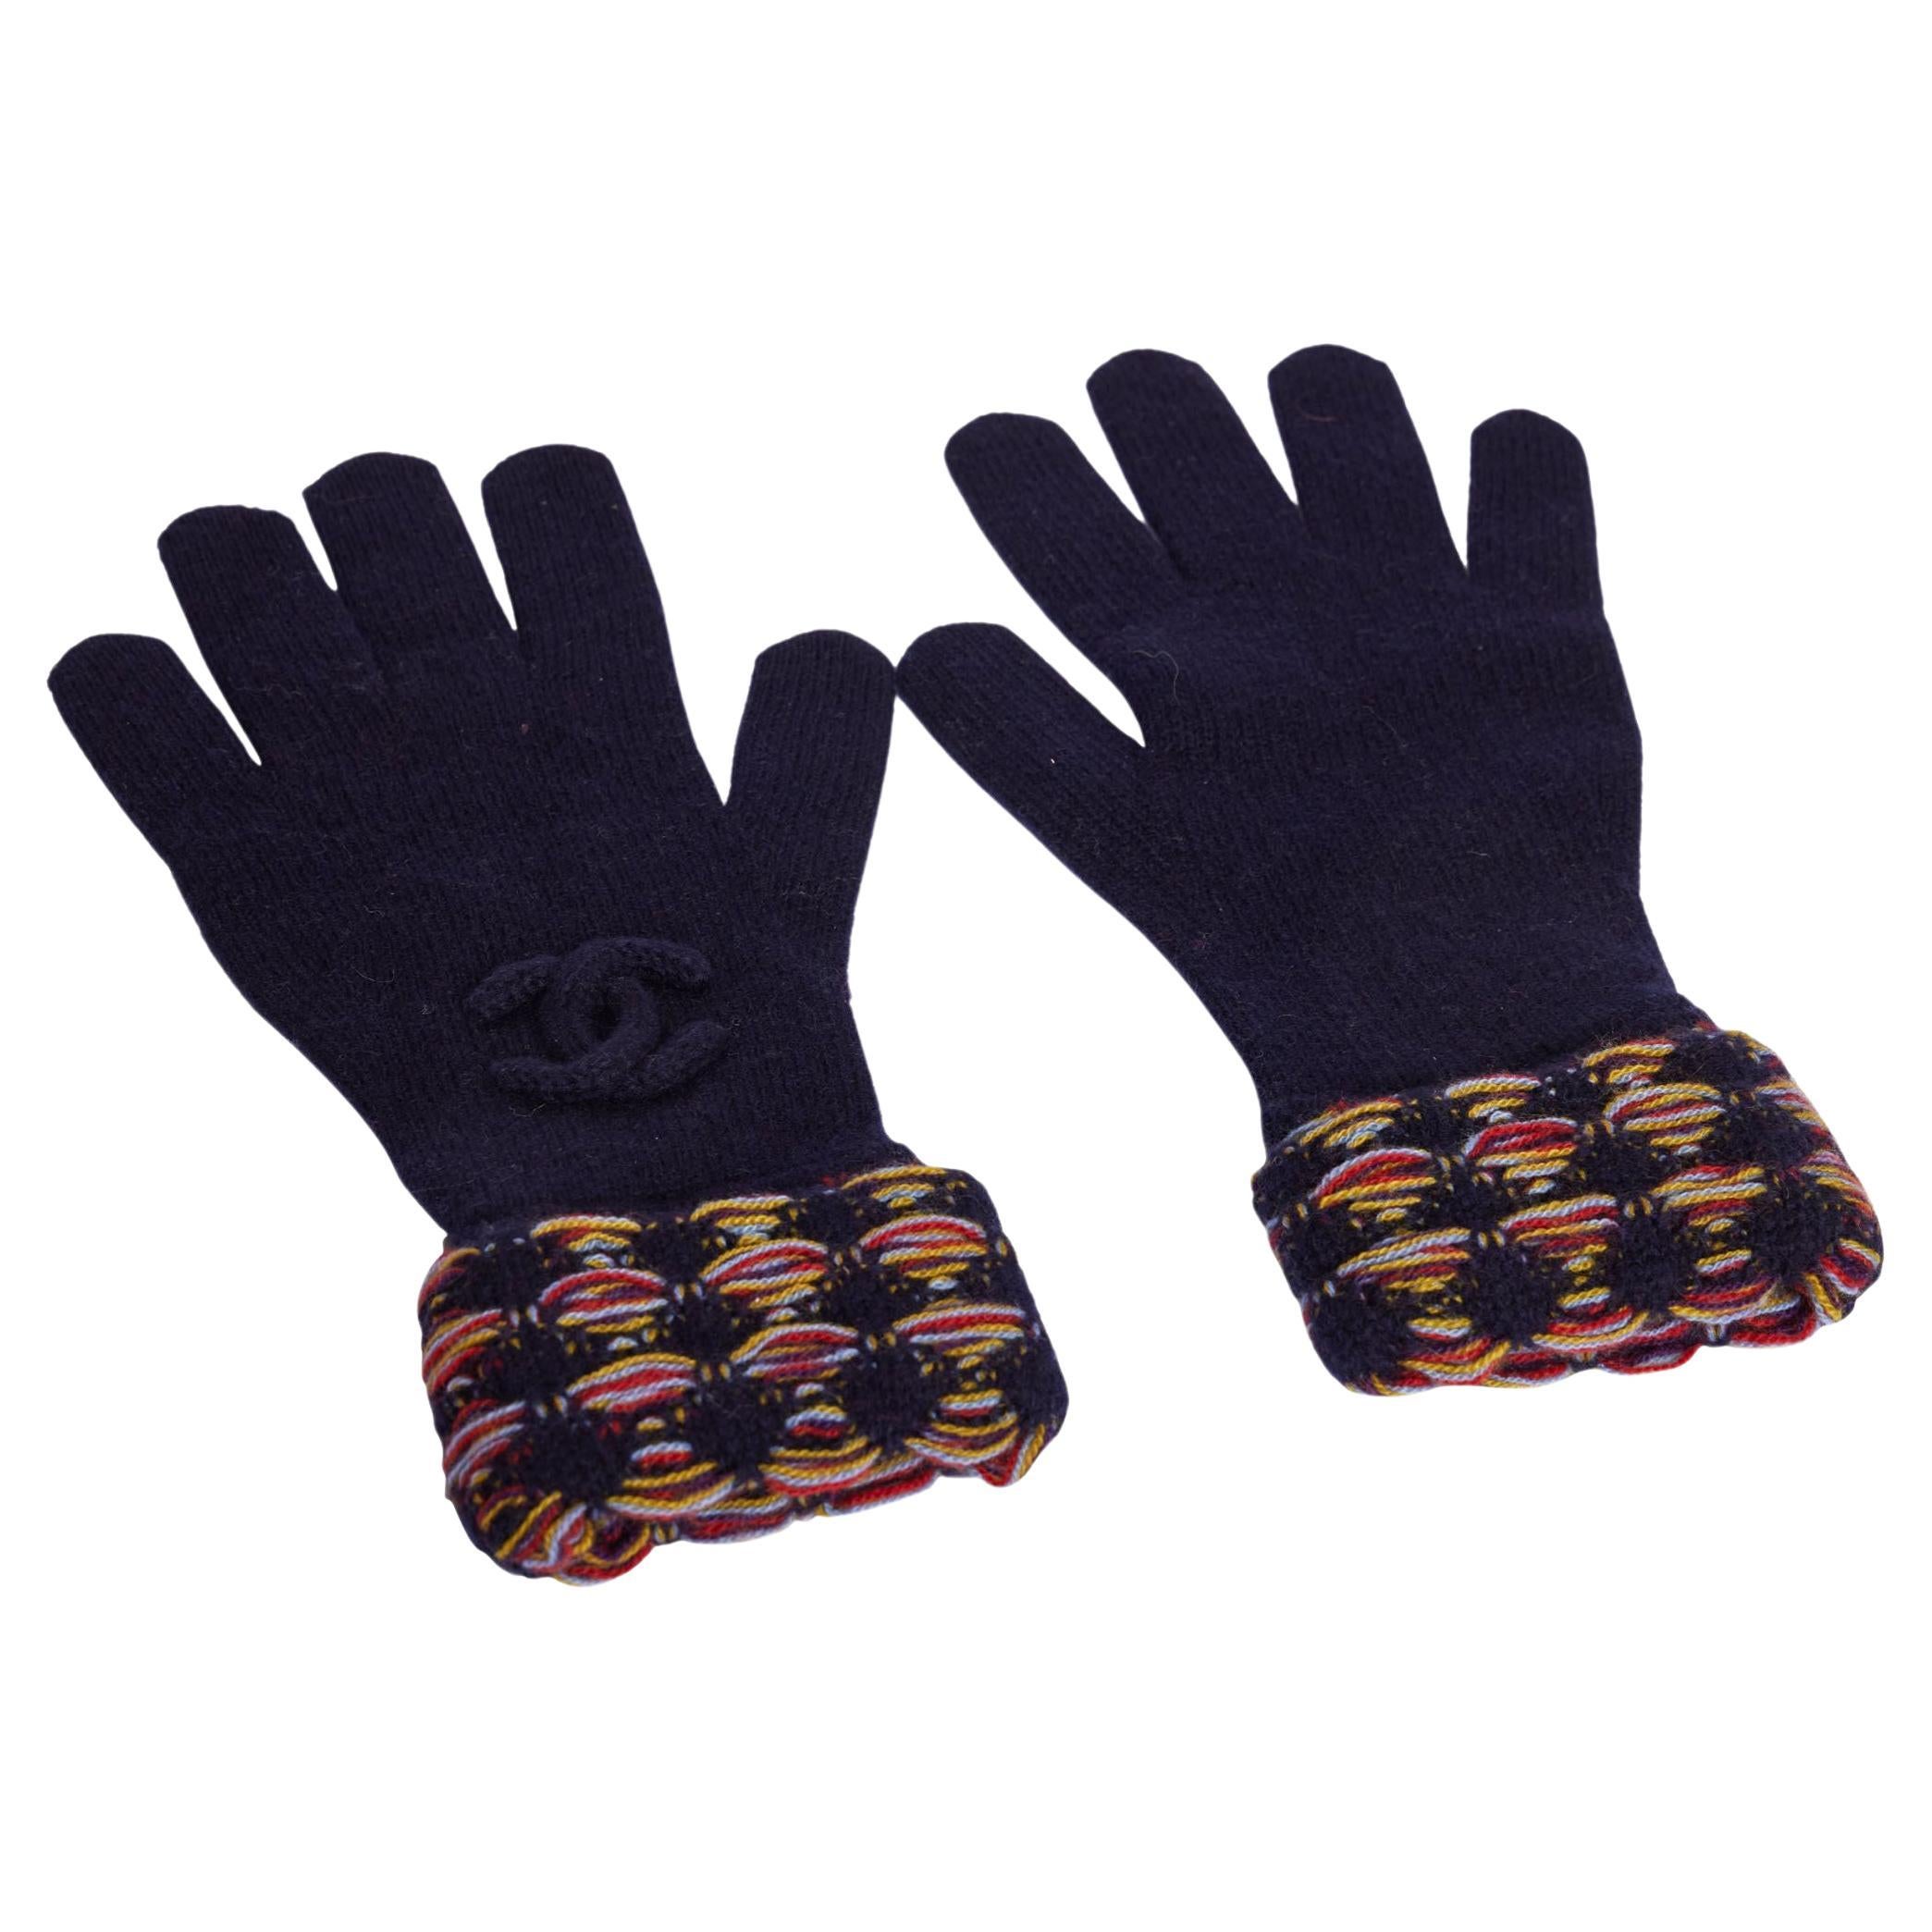 Chanel New Cashmere Gloves 7-8 Size For Sale